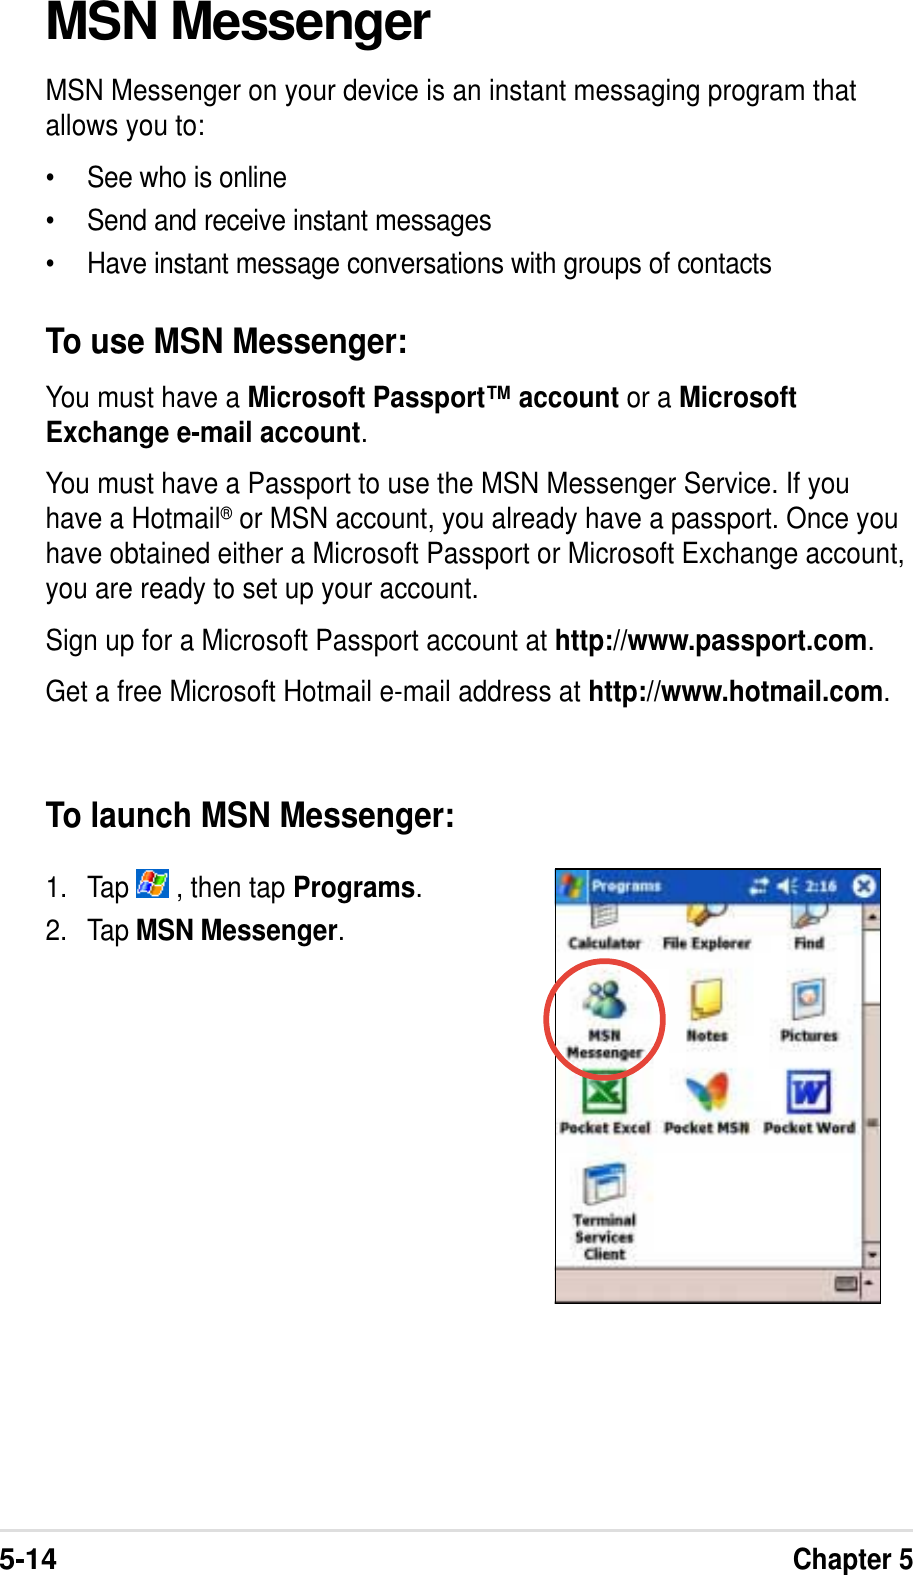 5-14Chapter 5MSN MessengerMSN Messenger on your device is an instant messaging program thatallows you to:• See who is online• Send and receive instant messages• Have instant message conversations with groups of contactsTo use MSN Messenger:You must have a Microsoft Passport™ account or a MicrosoftExchange e-mail account.You must have a Passport to use the MSN Messenger Service. If youhave a Hotmail® or MSN account, you already have a passport. Once youhave obtained either a Microsoft Passport or Microsoft Exchange account,you are ready to set up your account.Sign up for a Microsoft Passport account at http://www.passport.com.Get a free Microsoft Hotmail e-mail address at http://www.hotmail.com.To launch MSN Messenger:1. Tap   , then tap Programs.2. Tap MSN Messenger.